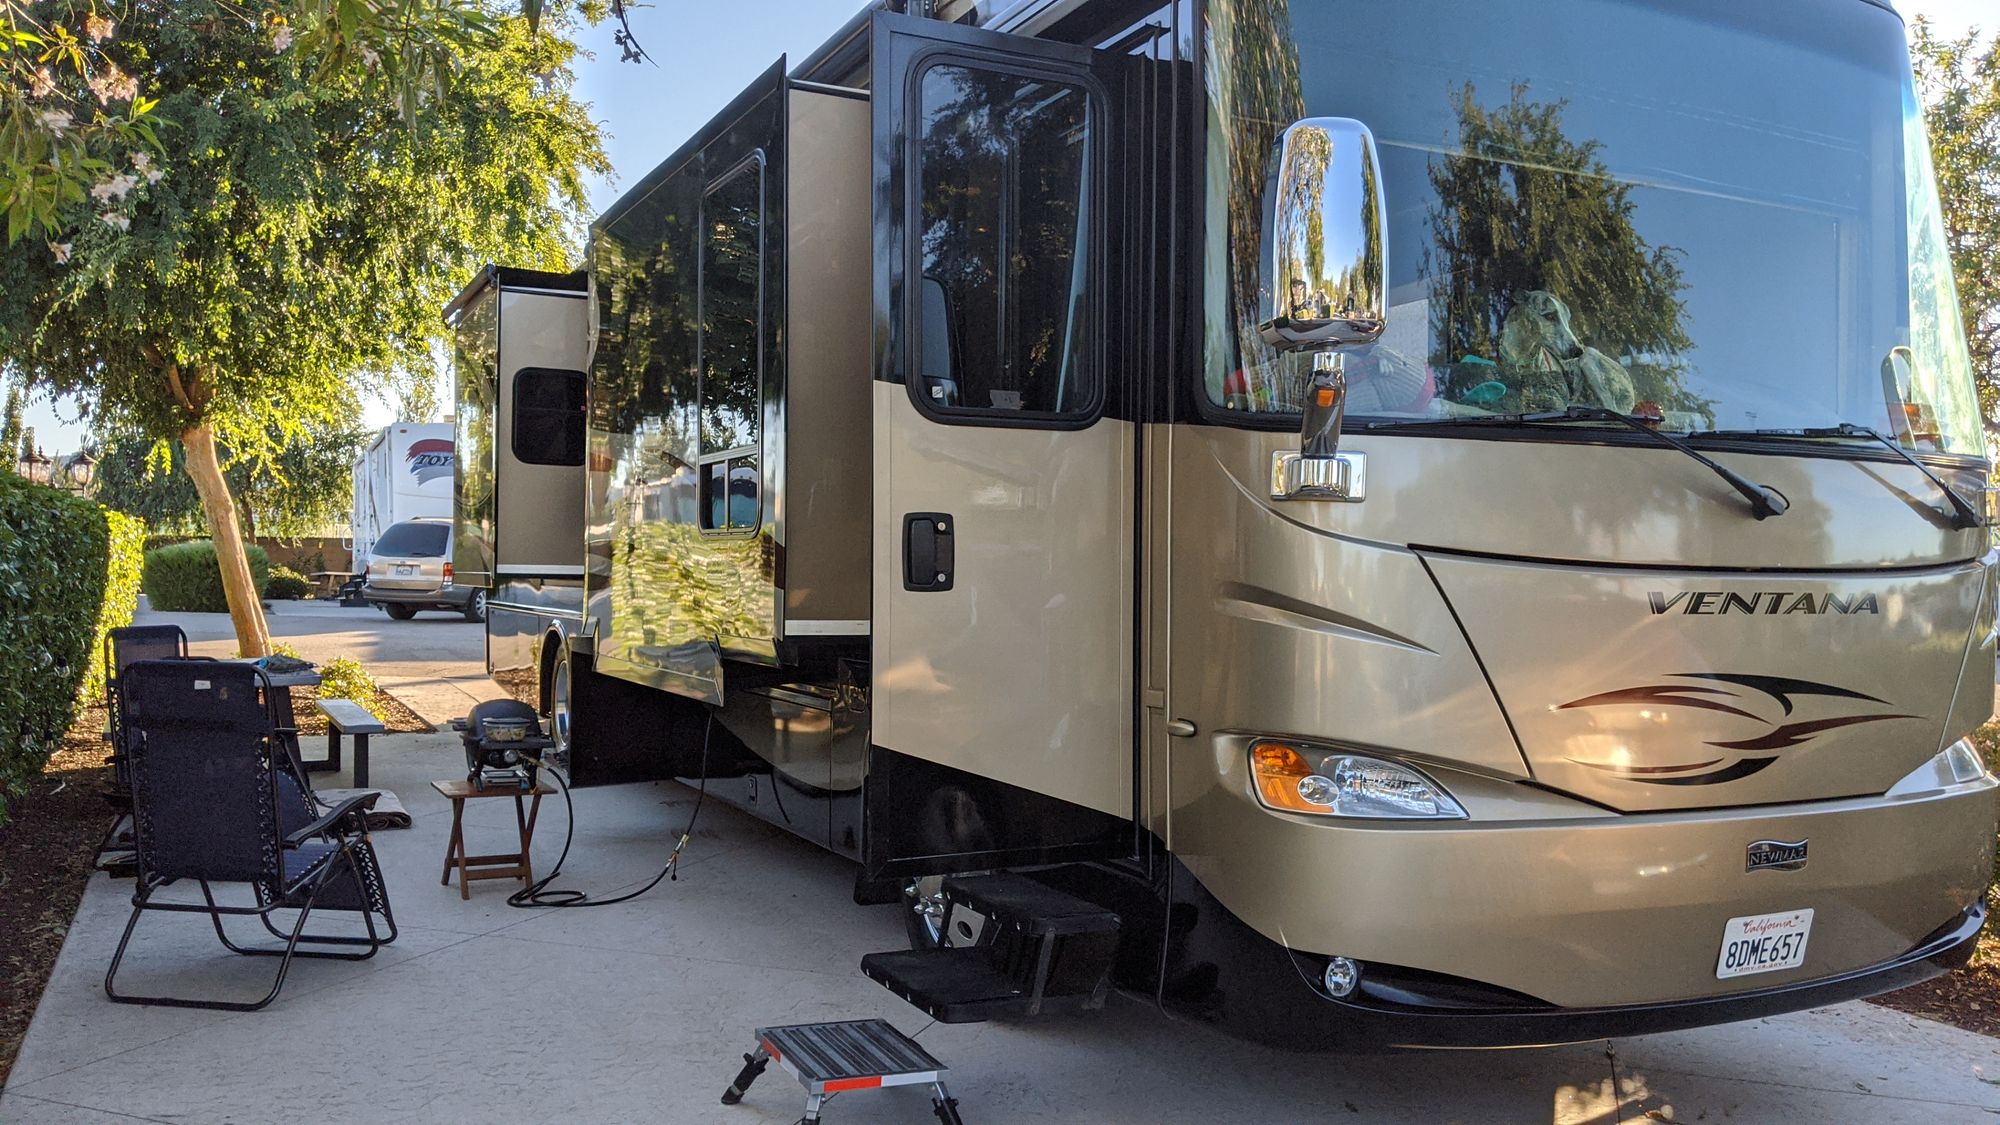 Remodeling an RV vs Buying a New RV